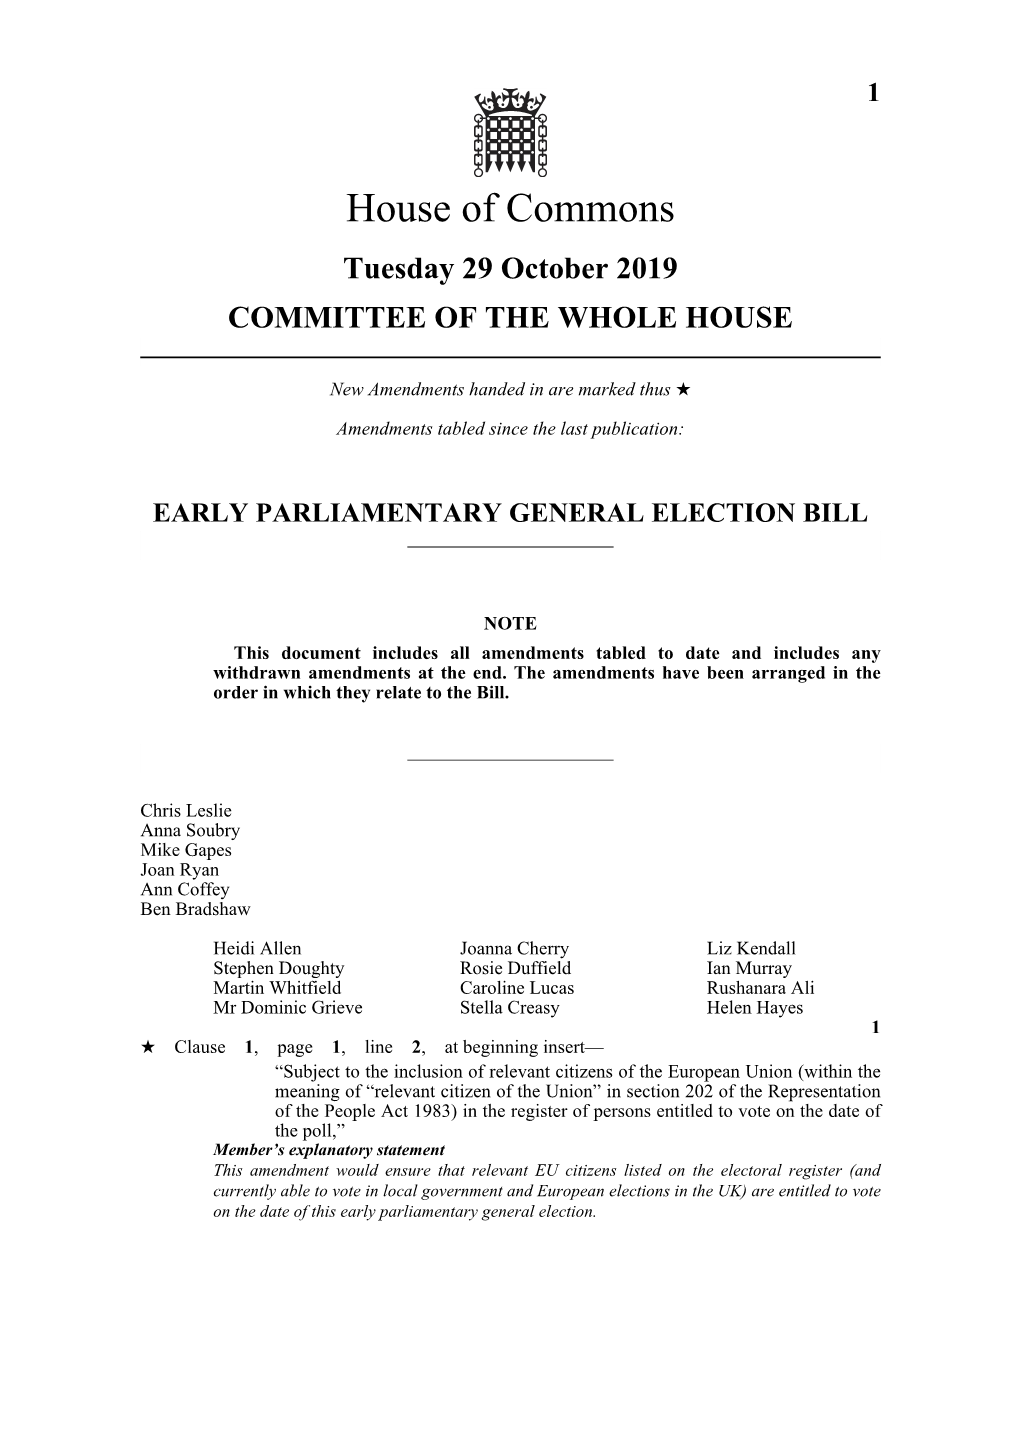 Early Parliamentary General Election Bill